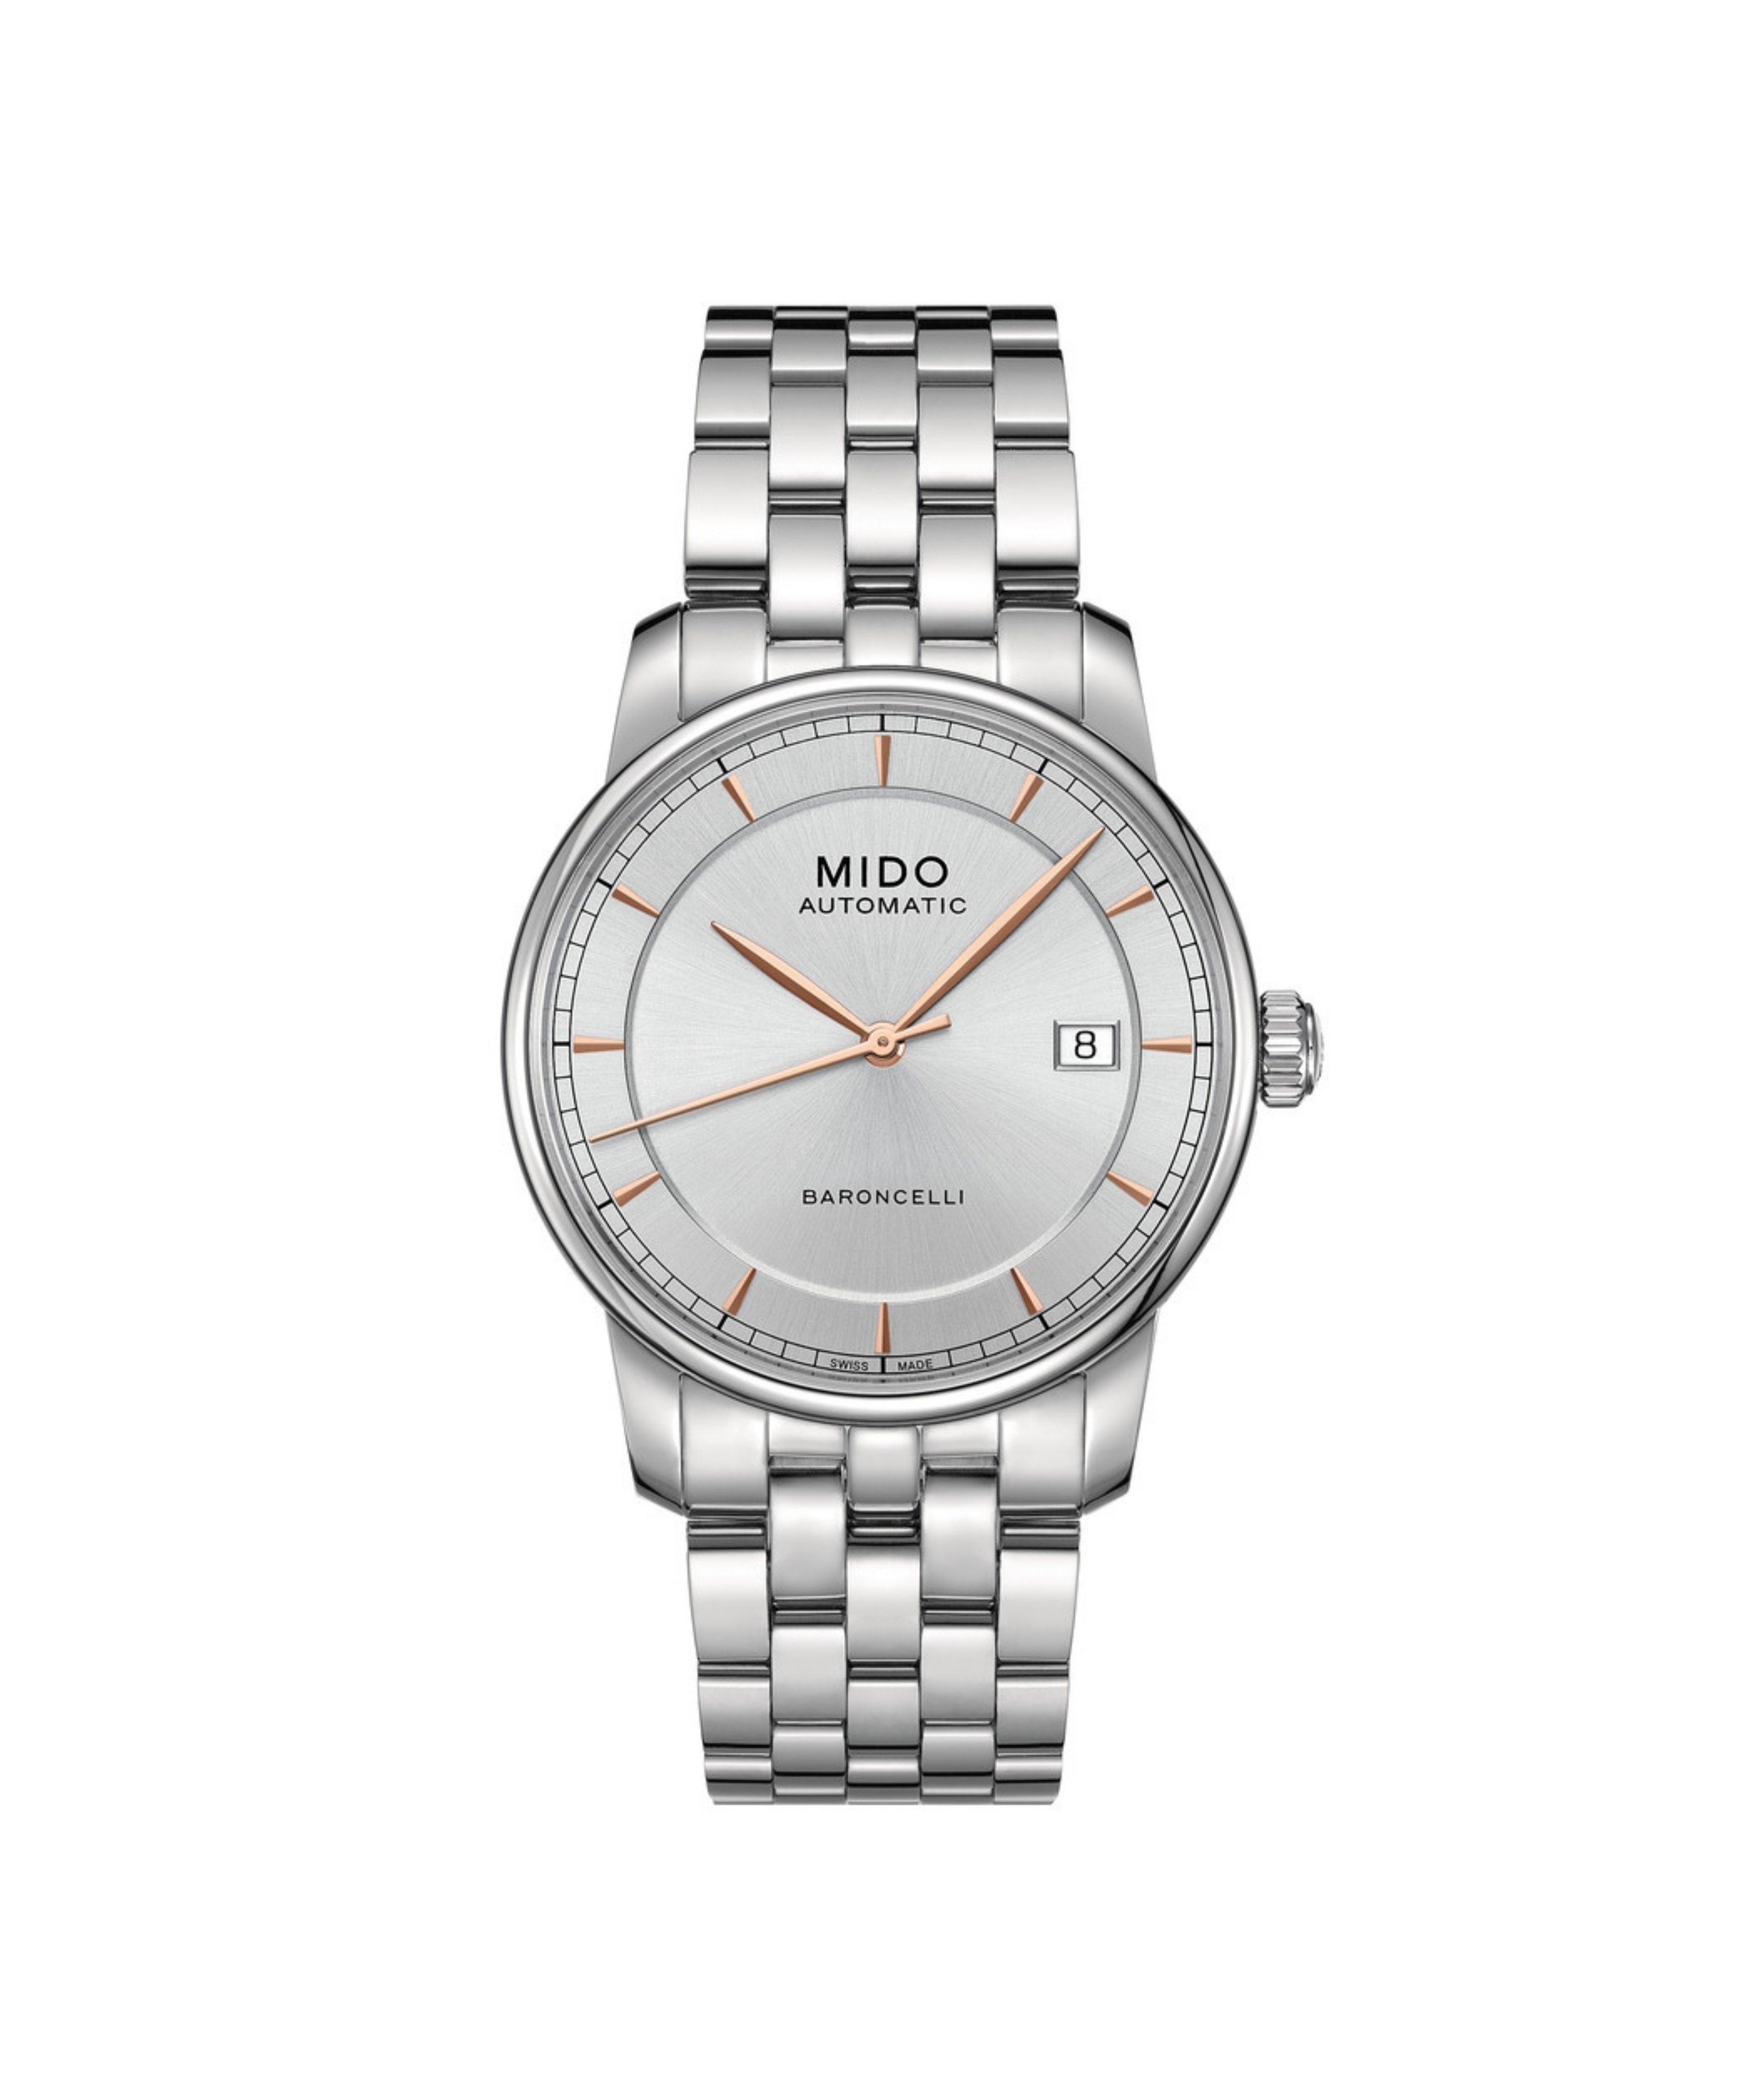 Montre Gent, collection Baroncelli image 0